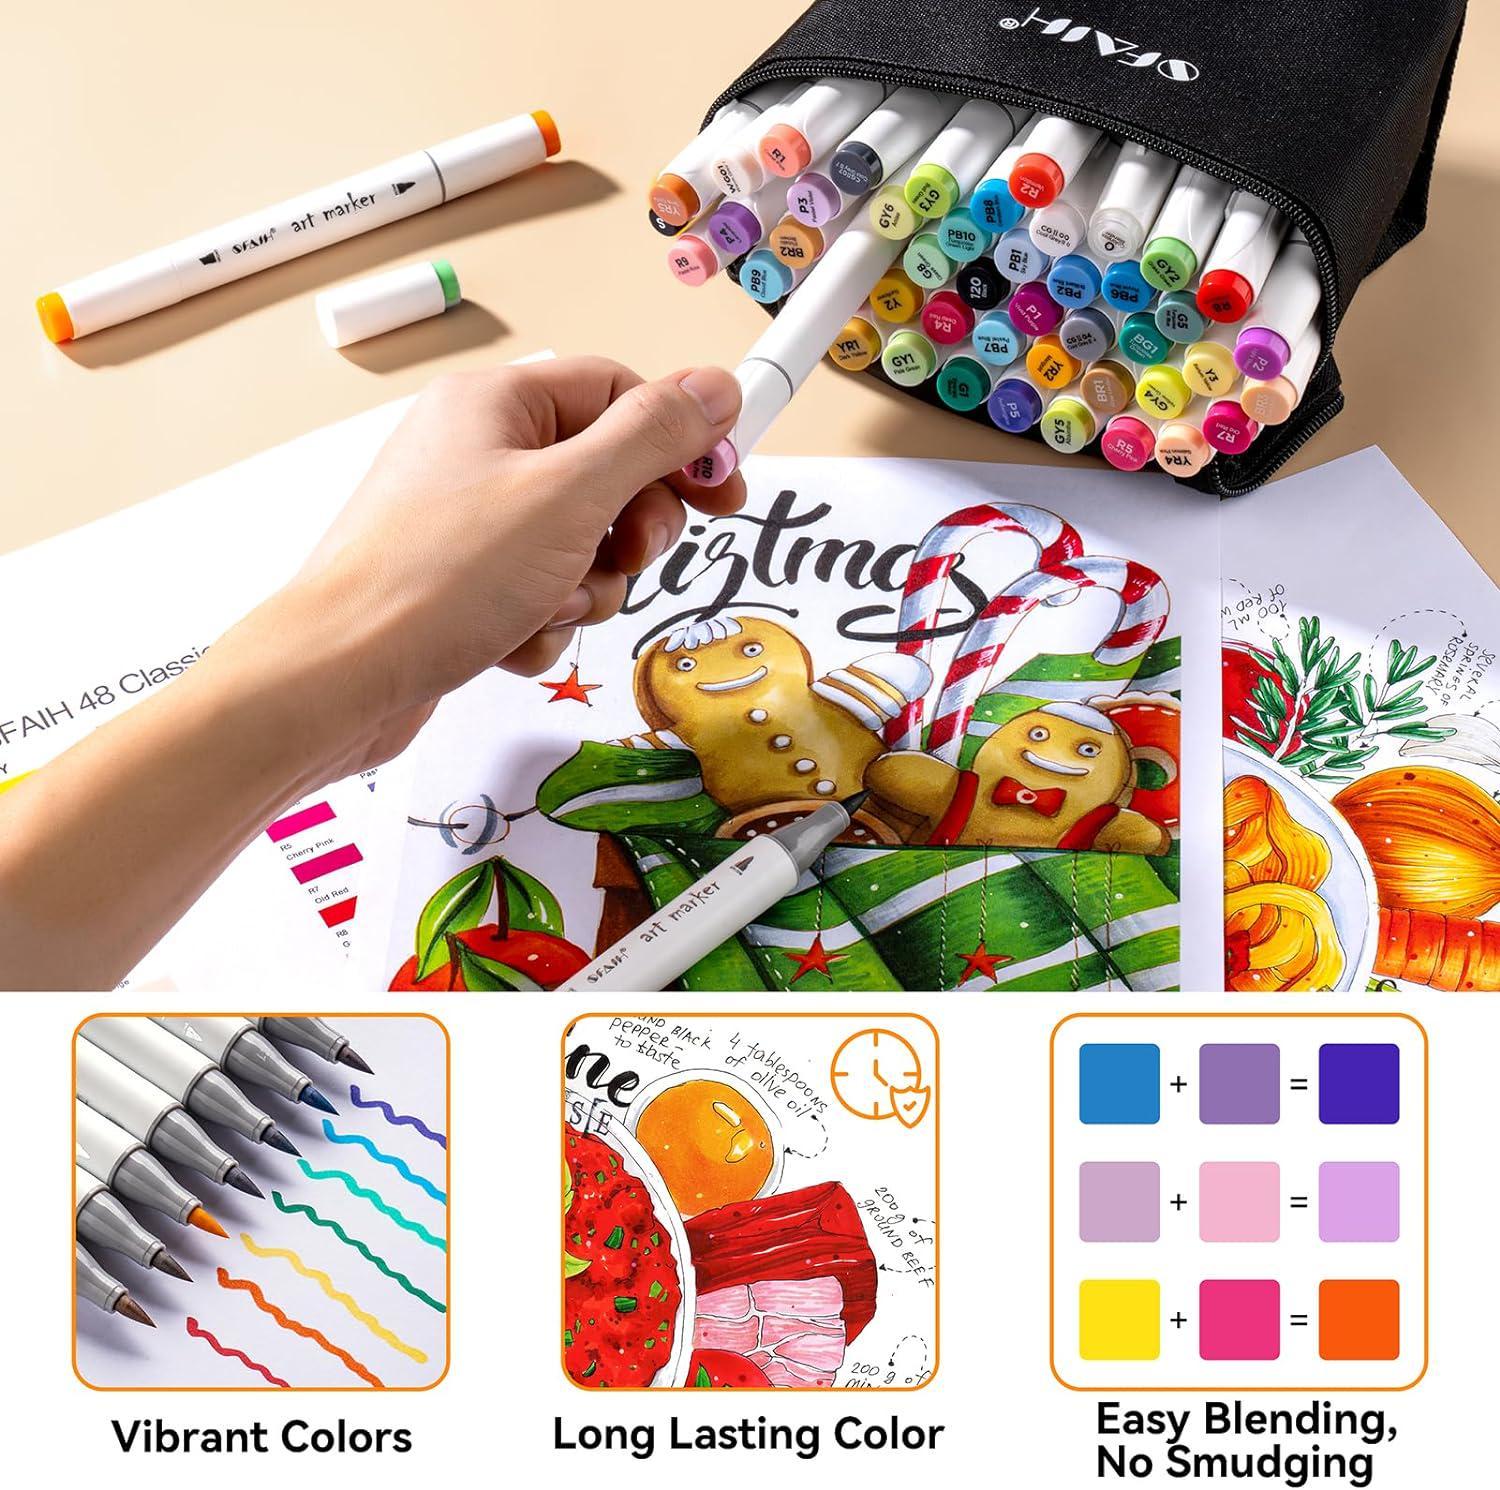  JEFFNIUB Dual Brush Markers Pens 24 Colors, No Bleed  Caligraphy Markers for Adult Coloring Book, Lettering, Drawing, Watercolor  : Arts, Crafts & Sewing